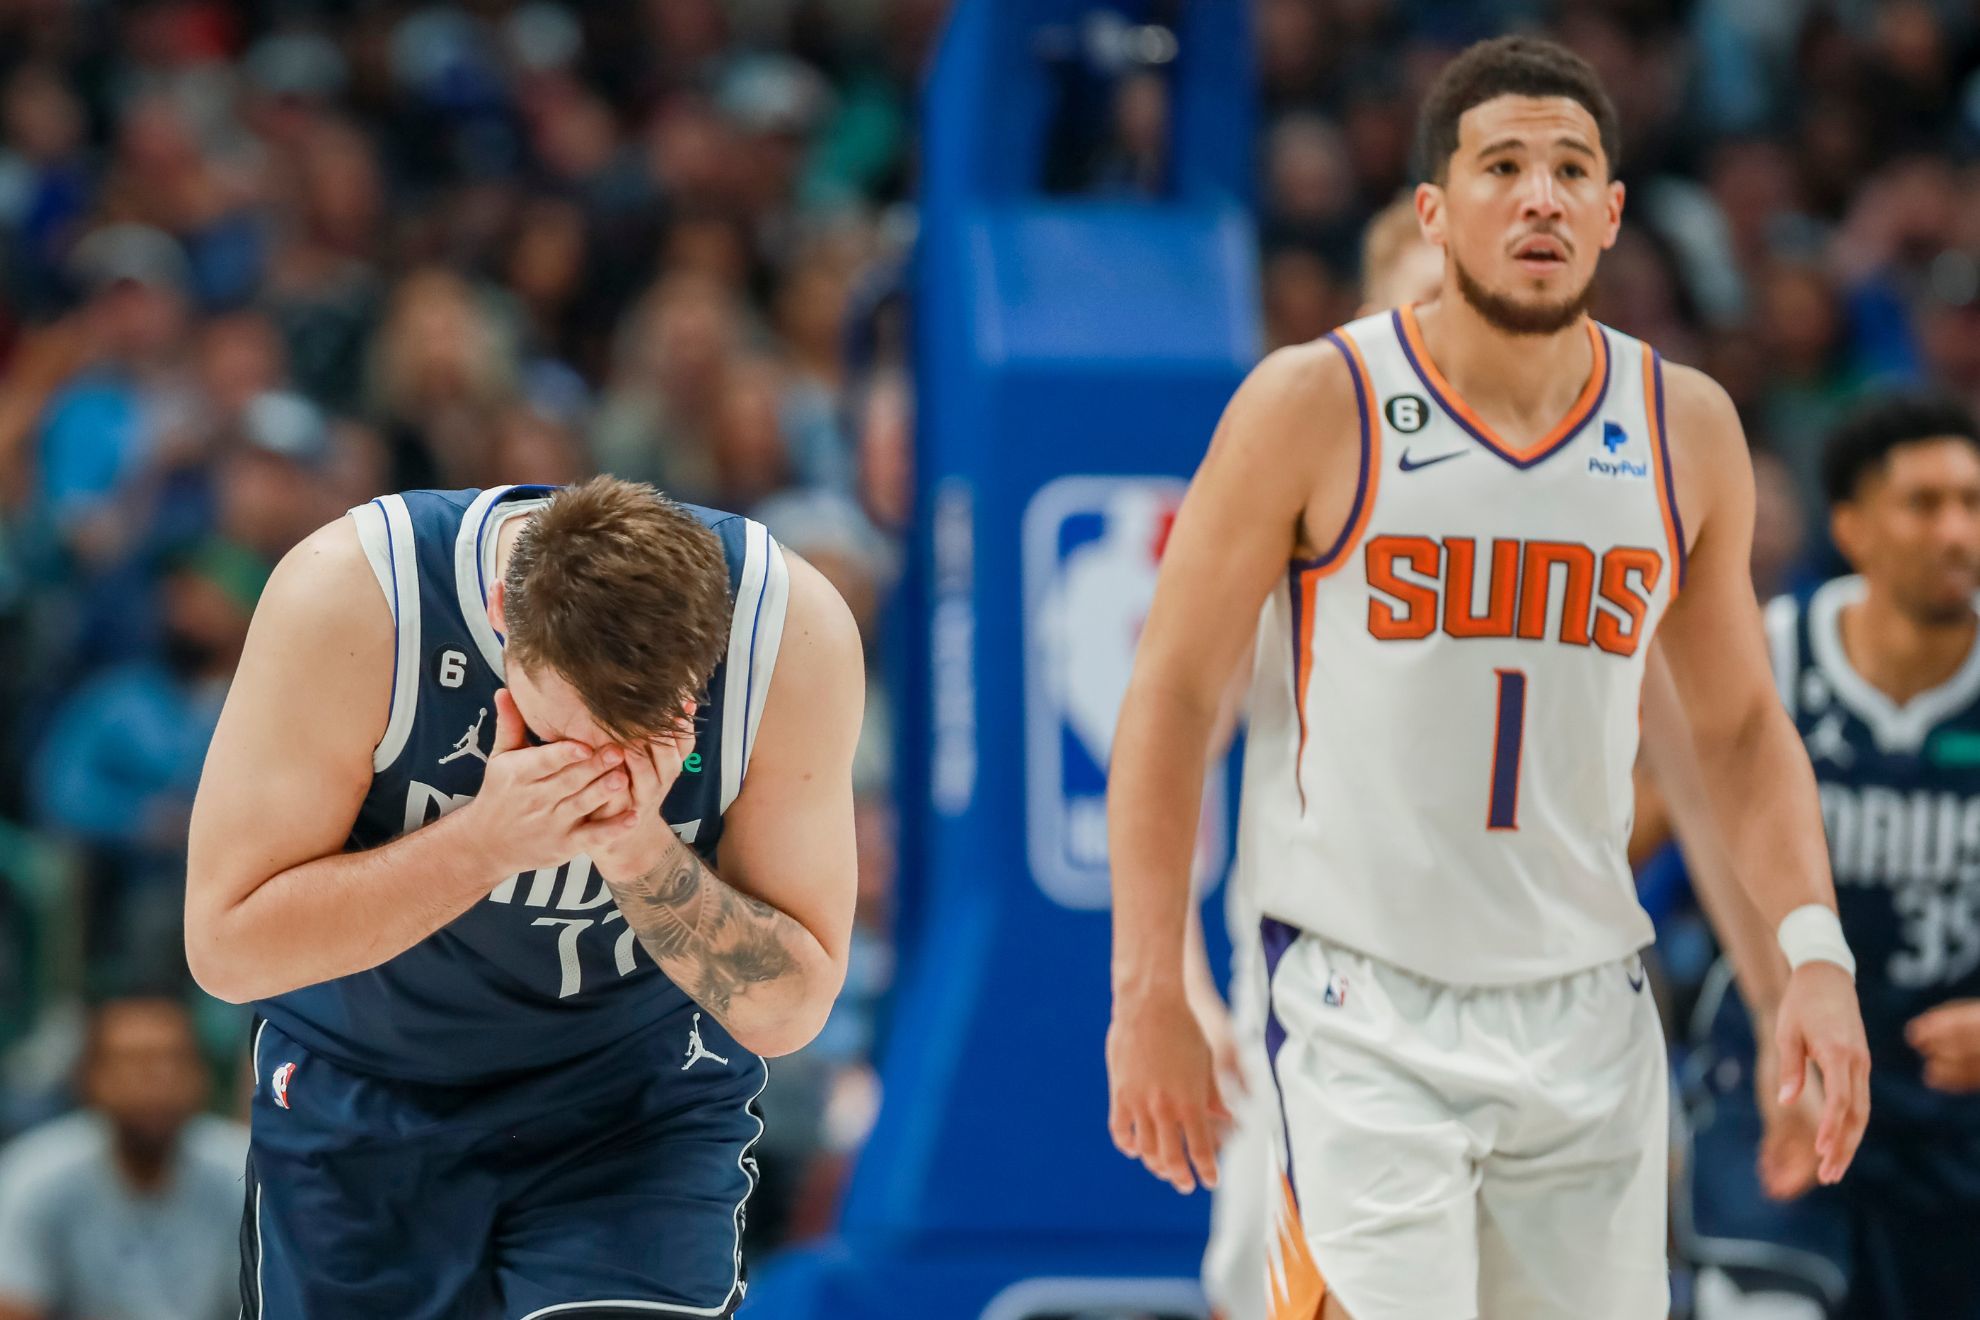 Doncic and Booker get into a scuffle during Suns vs. Mavericks